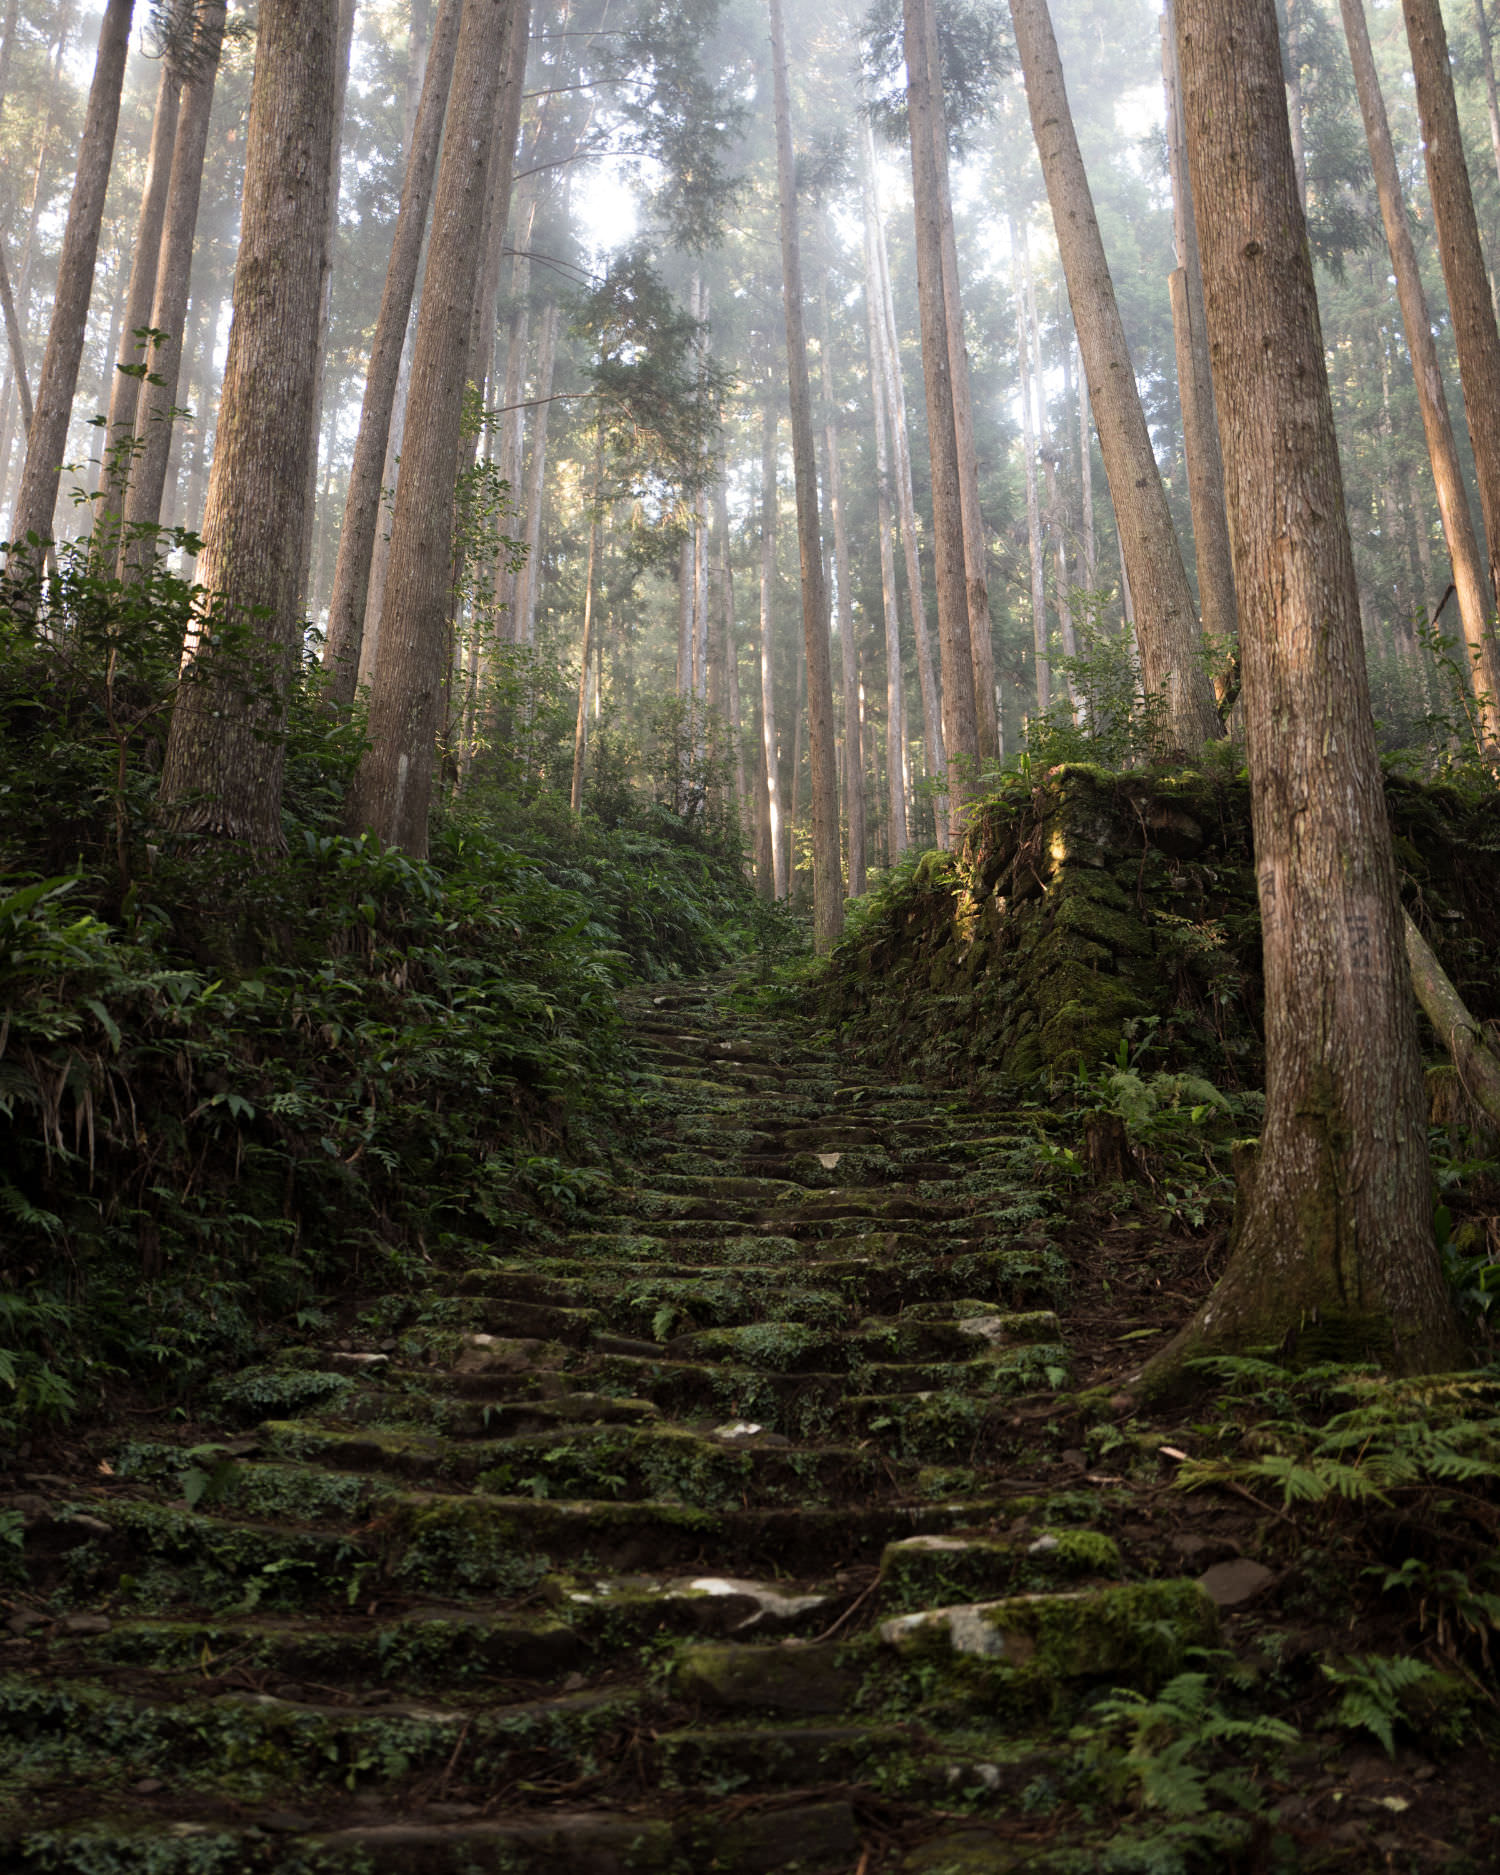 Fairly “classic” somewhat “boring” Kumano Kodo forest shot — just half-a-day’s walk north from our cafe, outside Koguchi — but, huh, look at that fecundity, blanket of wetness and greenery, early morning as evidenced by fog up above (burns off fast), adds to moisture (moss love this), moss covering Edo-era stone staircase, moss leading up to “body cutting slope,” one of so-called most difficult climbs on road (not that tough, actually), and to right, wall, subsumed by more (surprise) moss and ferns, old foundation circumscribing edge of long-since abandoned woodland rice plot, most likely teahouse once nearby; and final detail: those cedars, sad monoculture of path, cedars cedars and more post-war cedars, which is why you may notice so very little birdsong in these woods, but on them: characters, words, sometimes protests against UNESCO listings, sometimes a simple cataloging of trees by owners of logging companies (as is case here).
